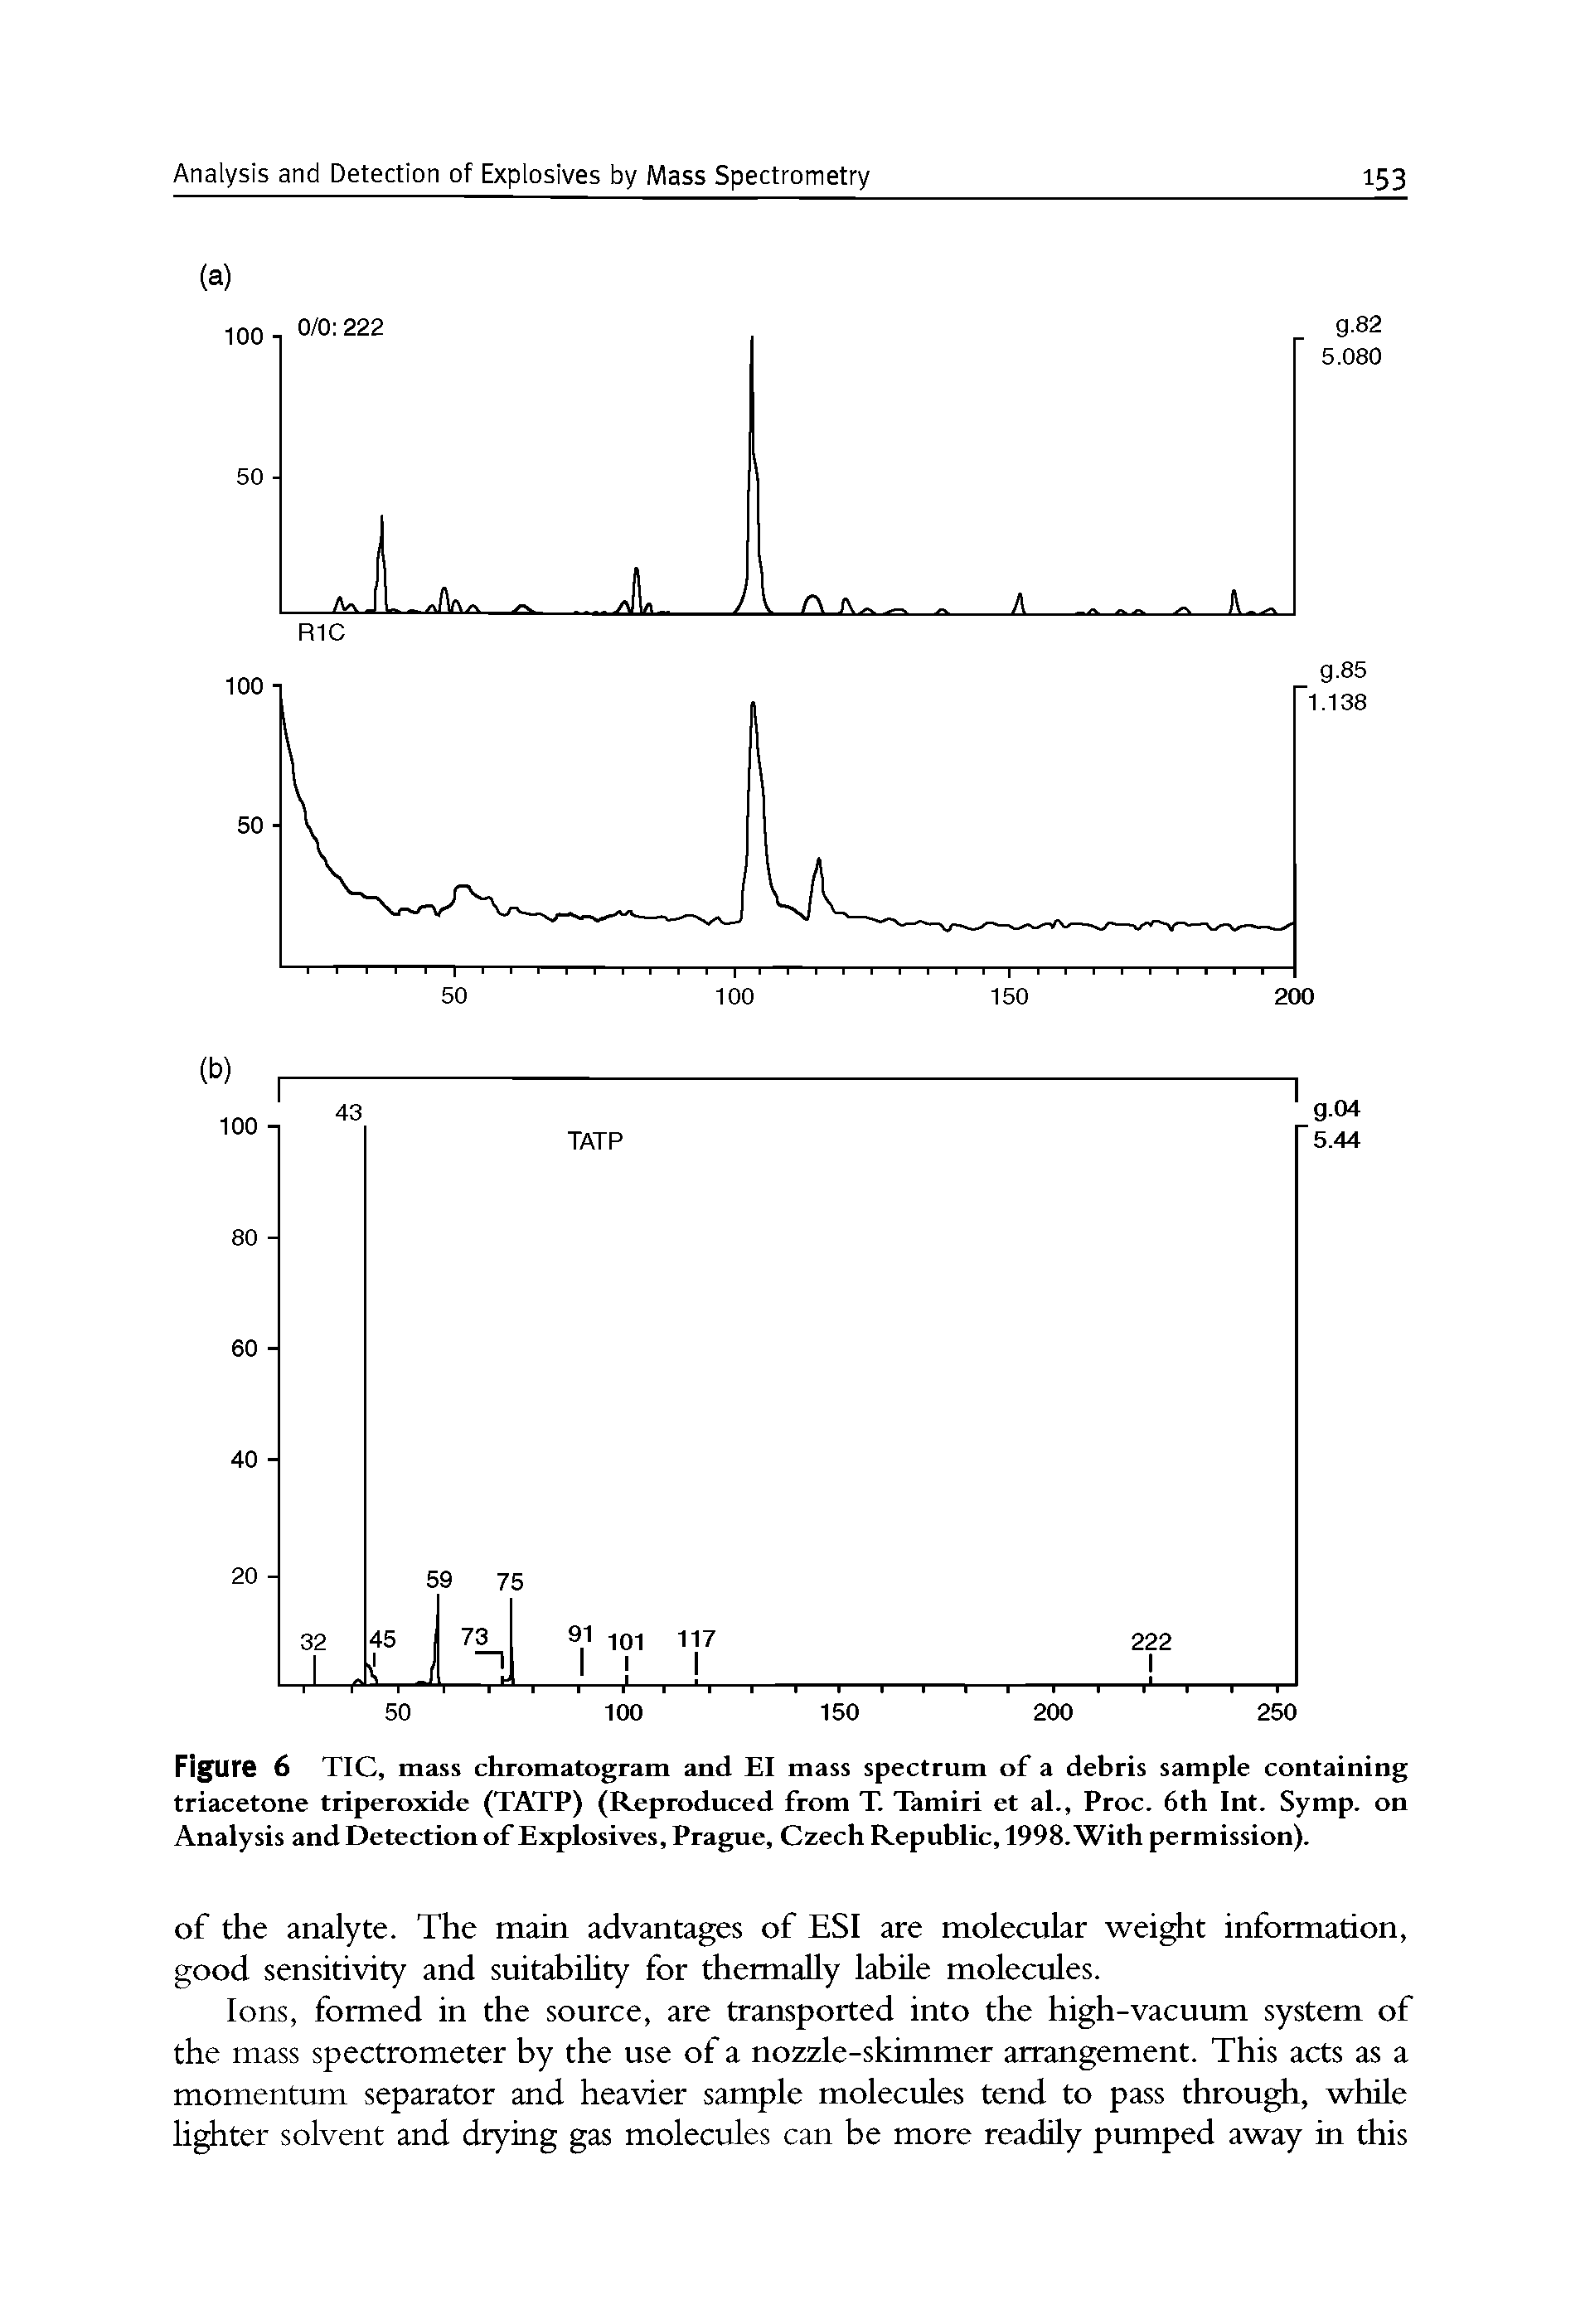 Figure 6 TIC, mass chromatogram and El mass spectrum of a debris sample containing triacetone triperoxide (TATP) (Reproduced from T. Tamiri et al., Proc. 6th Int. Symp. on Analysis and Detection of Explosives, Prague, Czech Republic, 1998. With permission).